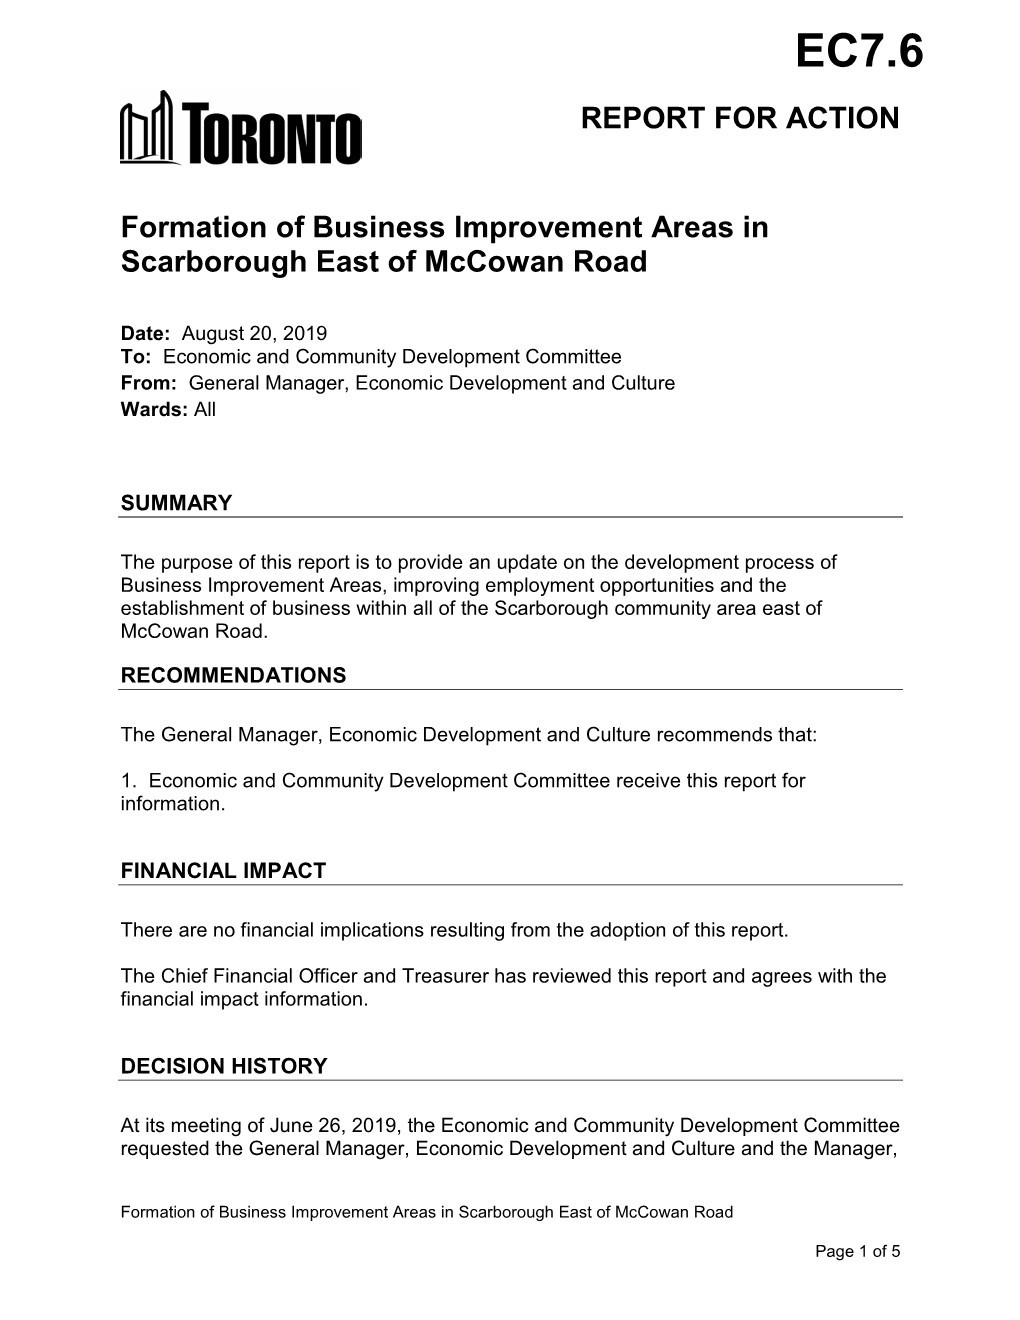 Formation of Business Improvement Areas in Scarborough East of Mccowan Road